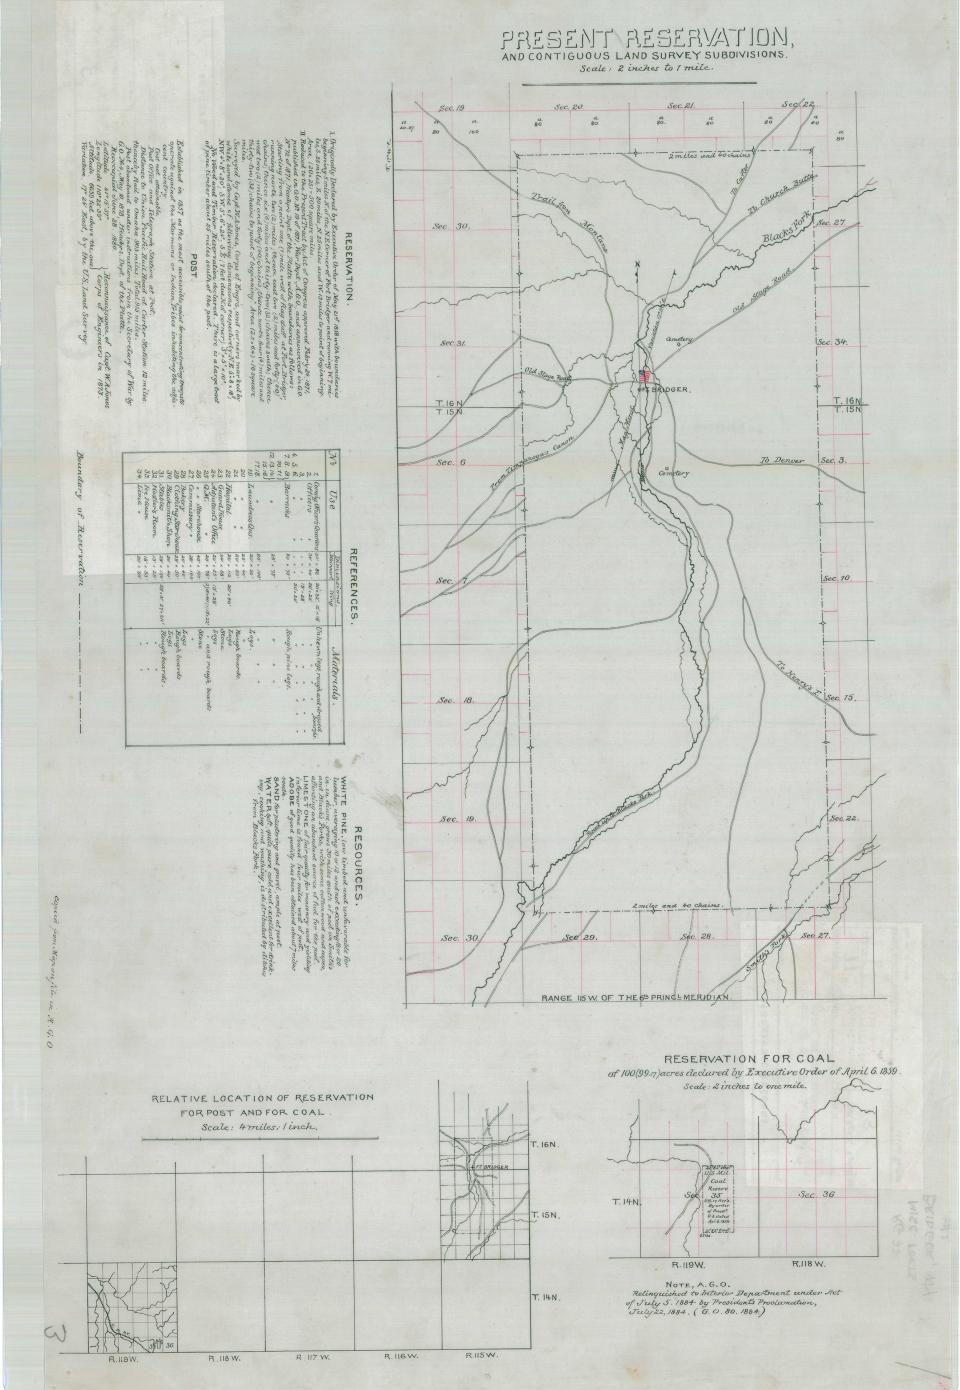 Figure 10: The Fort Bridger Military Reservation, 1871. Numerous roads radiate out from Fort Bridger including one road labeled “To Denver”. This is the west end of Cherokee Trail Southern Route. National Archives.